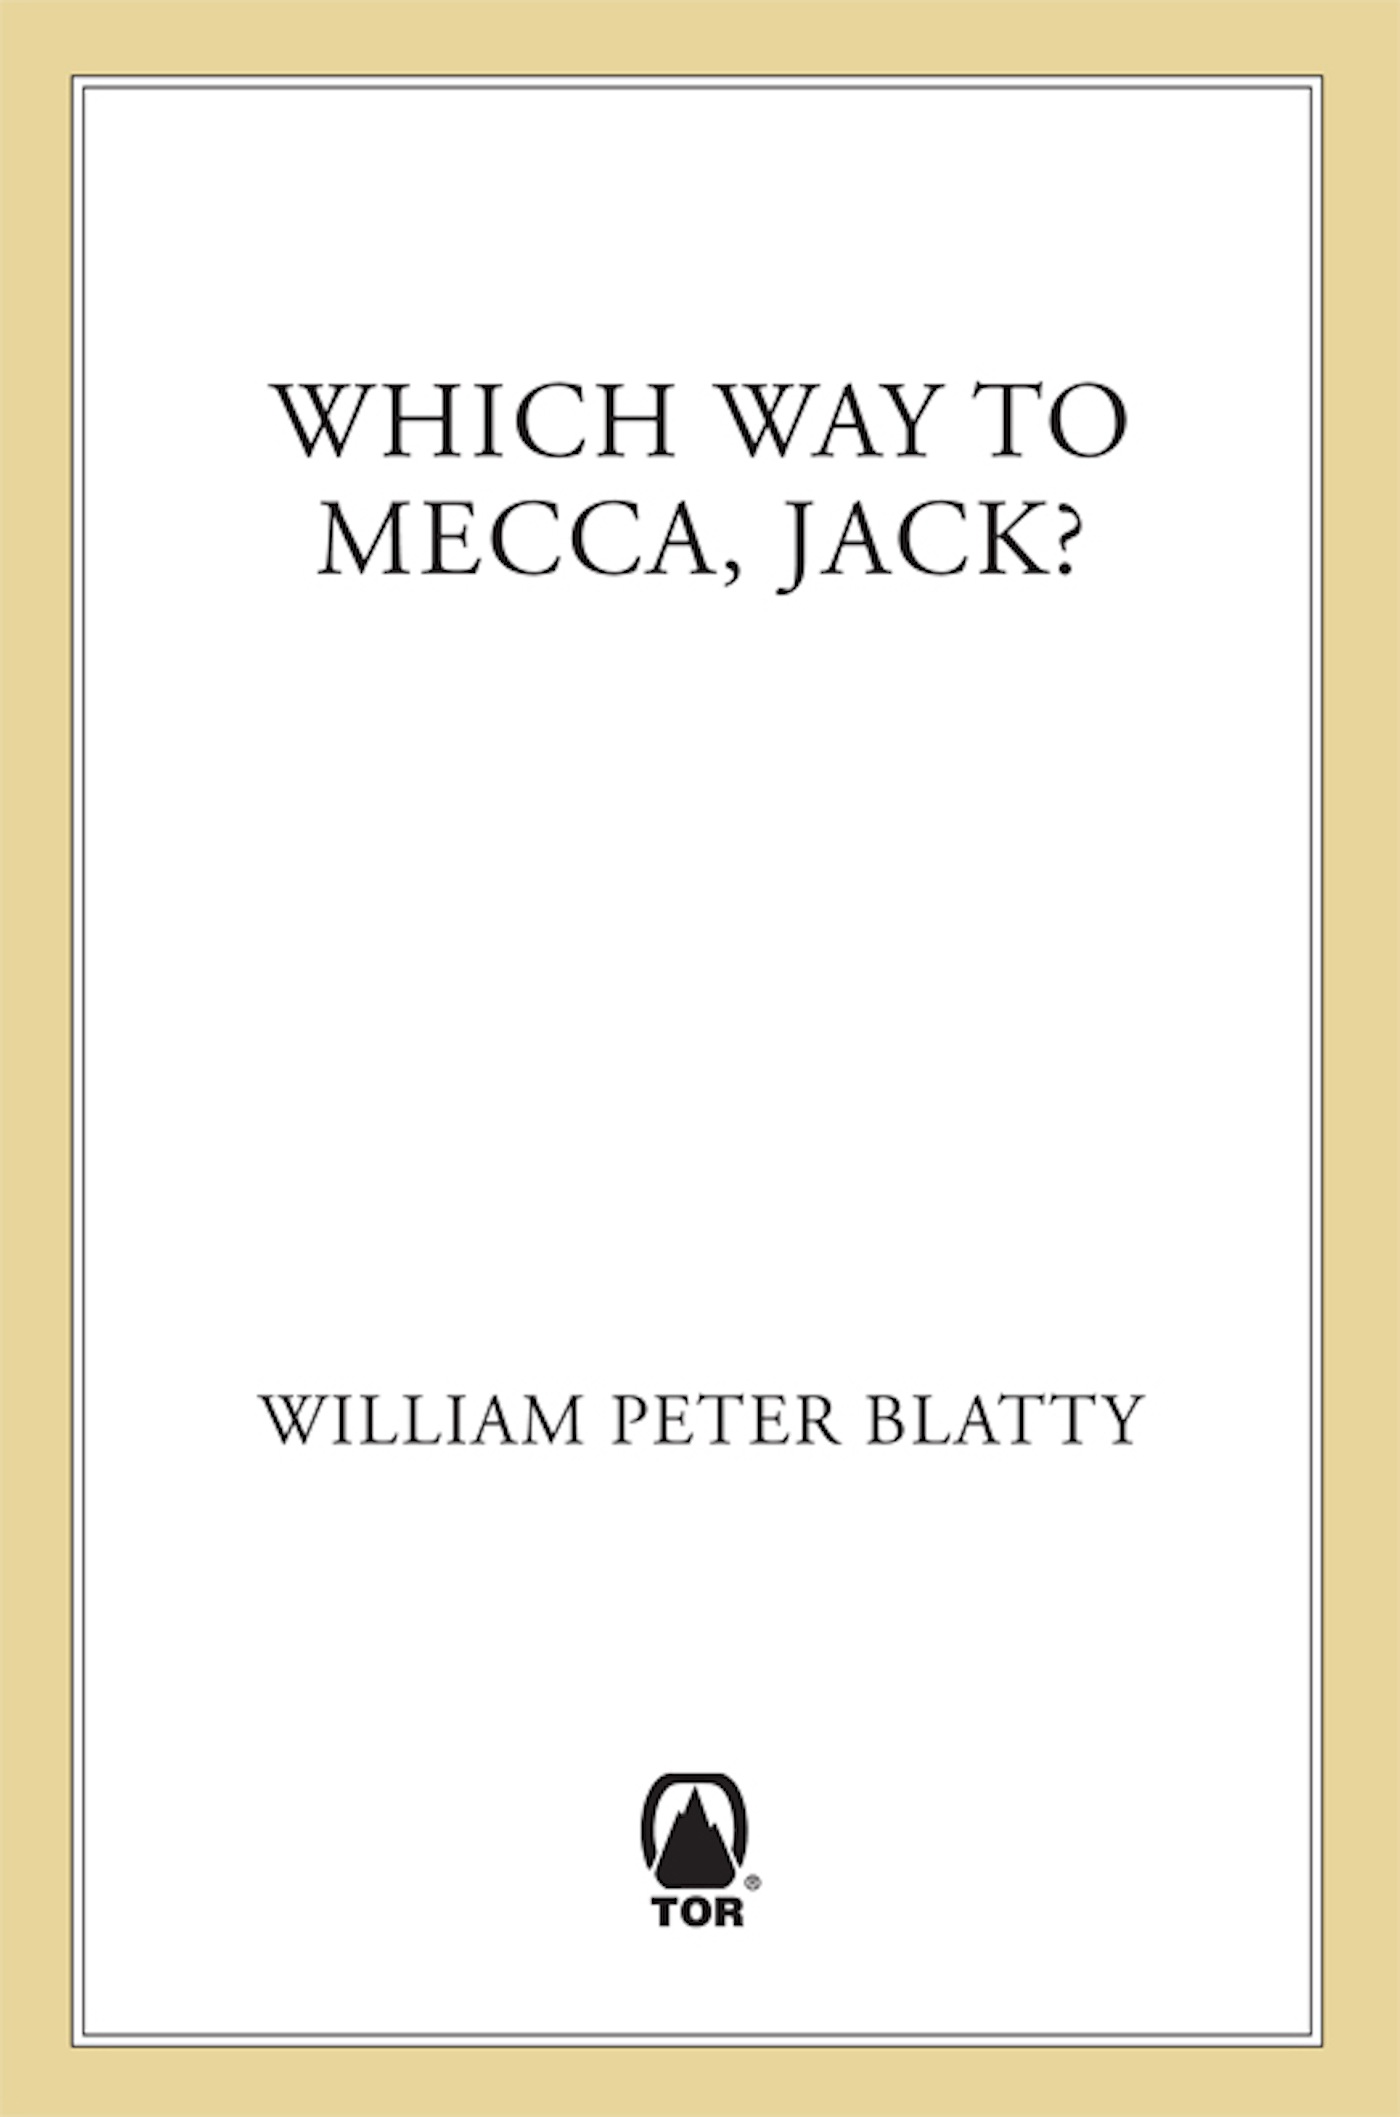 Which Way to Mecca, Jack? : From Brooklyn to Beirut: The Adventures of an American Sheik by William Peter Blatty